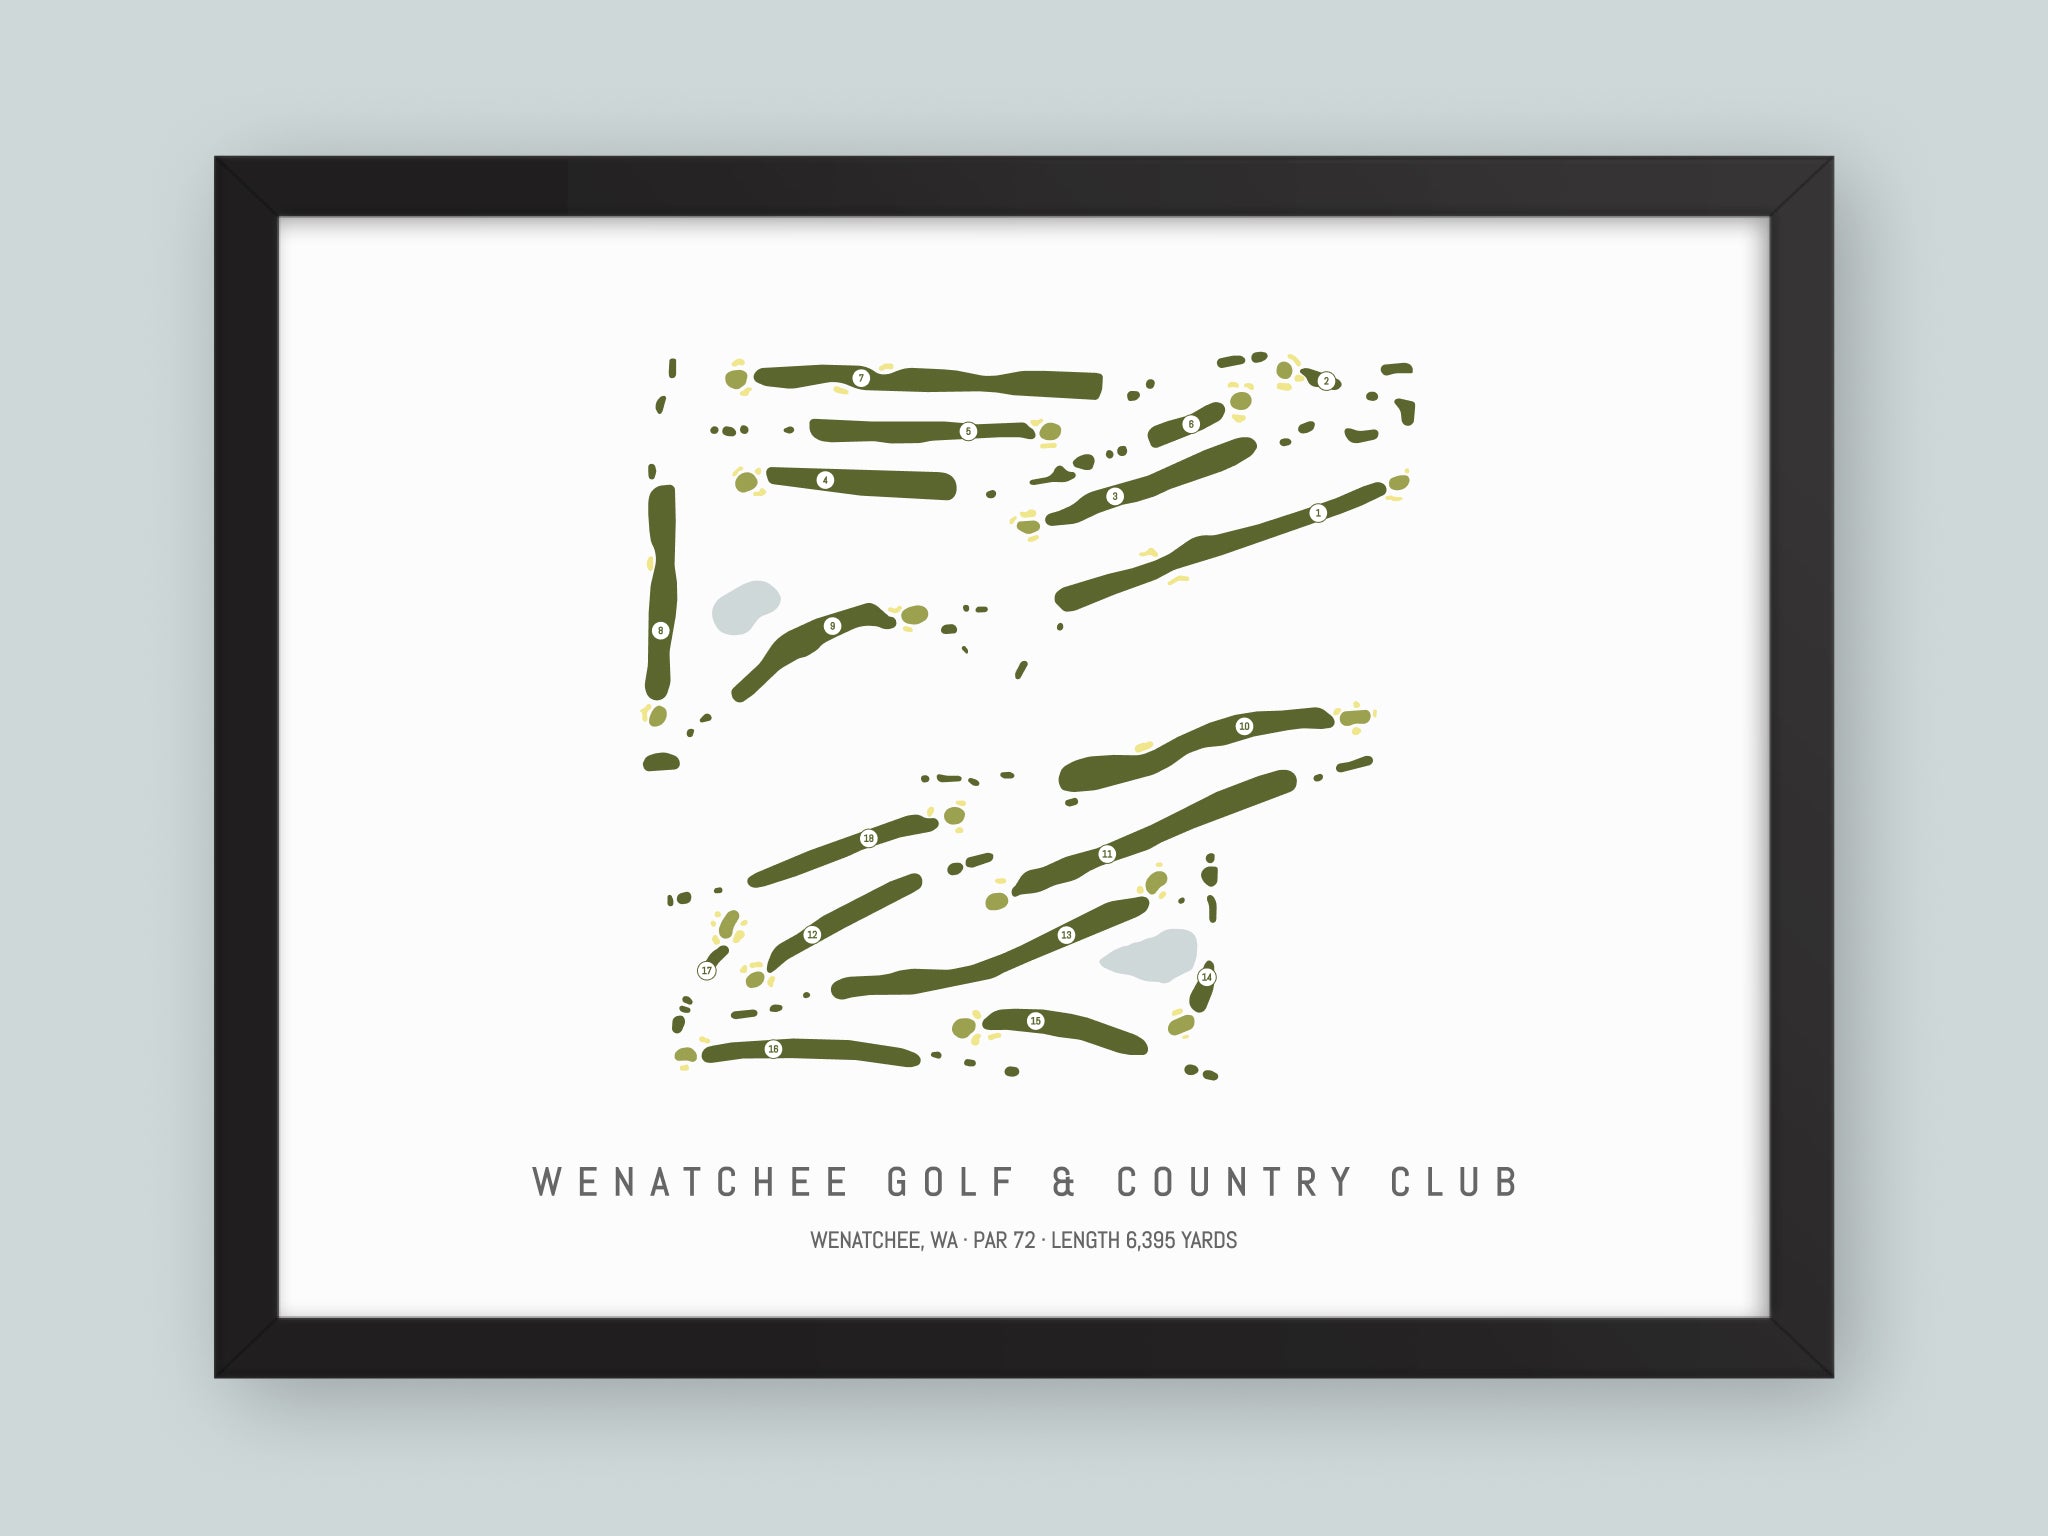 Wenatchee-Golf-And-Country-Club-WA--Black-Frame-24x18-With-Hole-Numbers